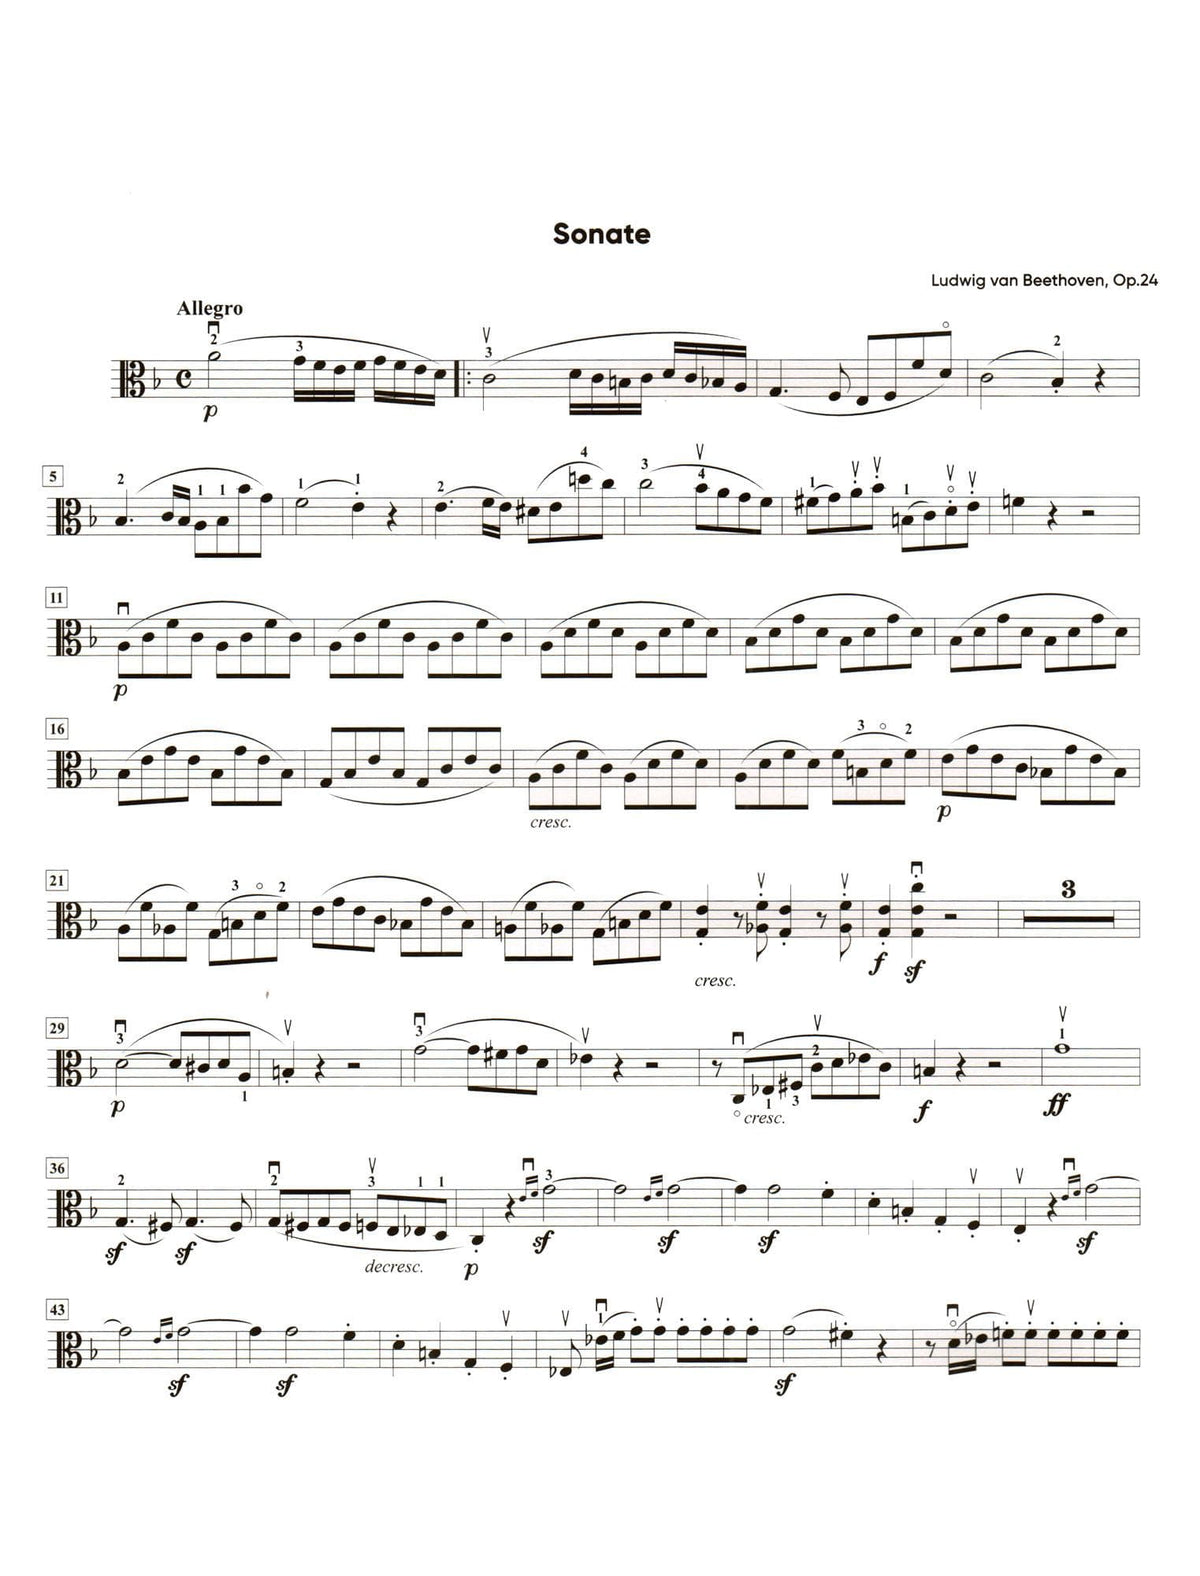 Beethoven, Ludwig - Sonata, Op 24, "Spring" - transcribed for Viola and Piano by Andre Roy - Editions Royalto